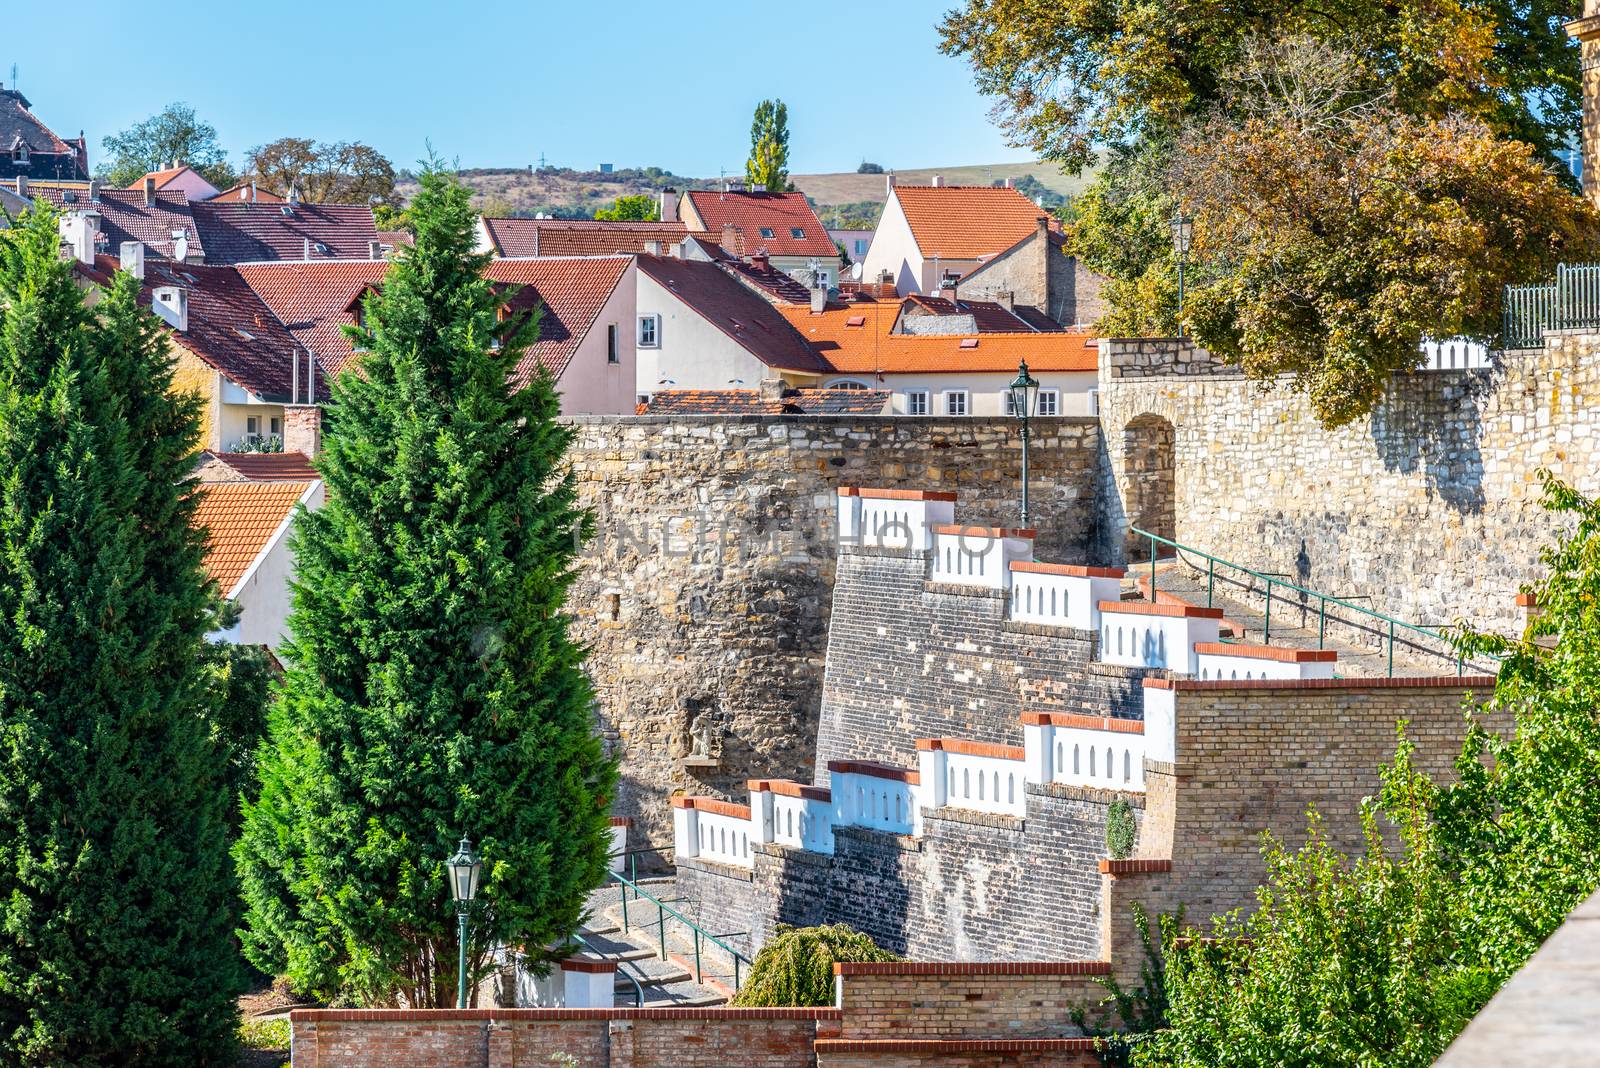 Fortification walls and baileys in historical city centre of Litomerice, Czech Republic by pyty